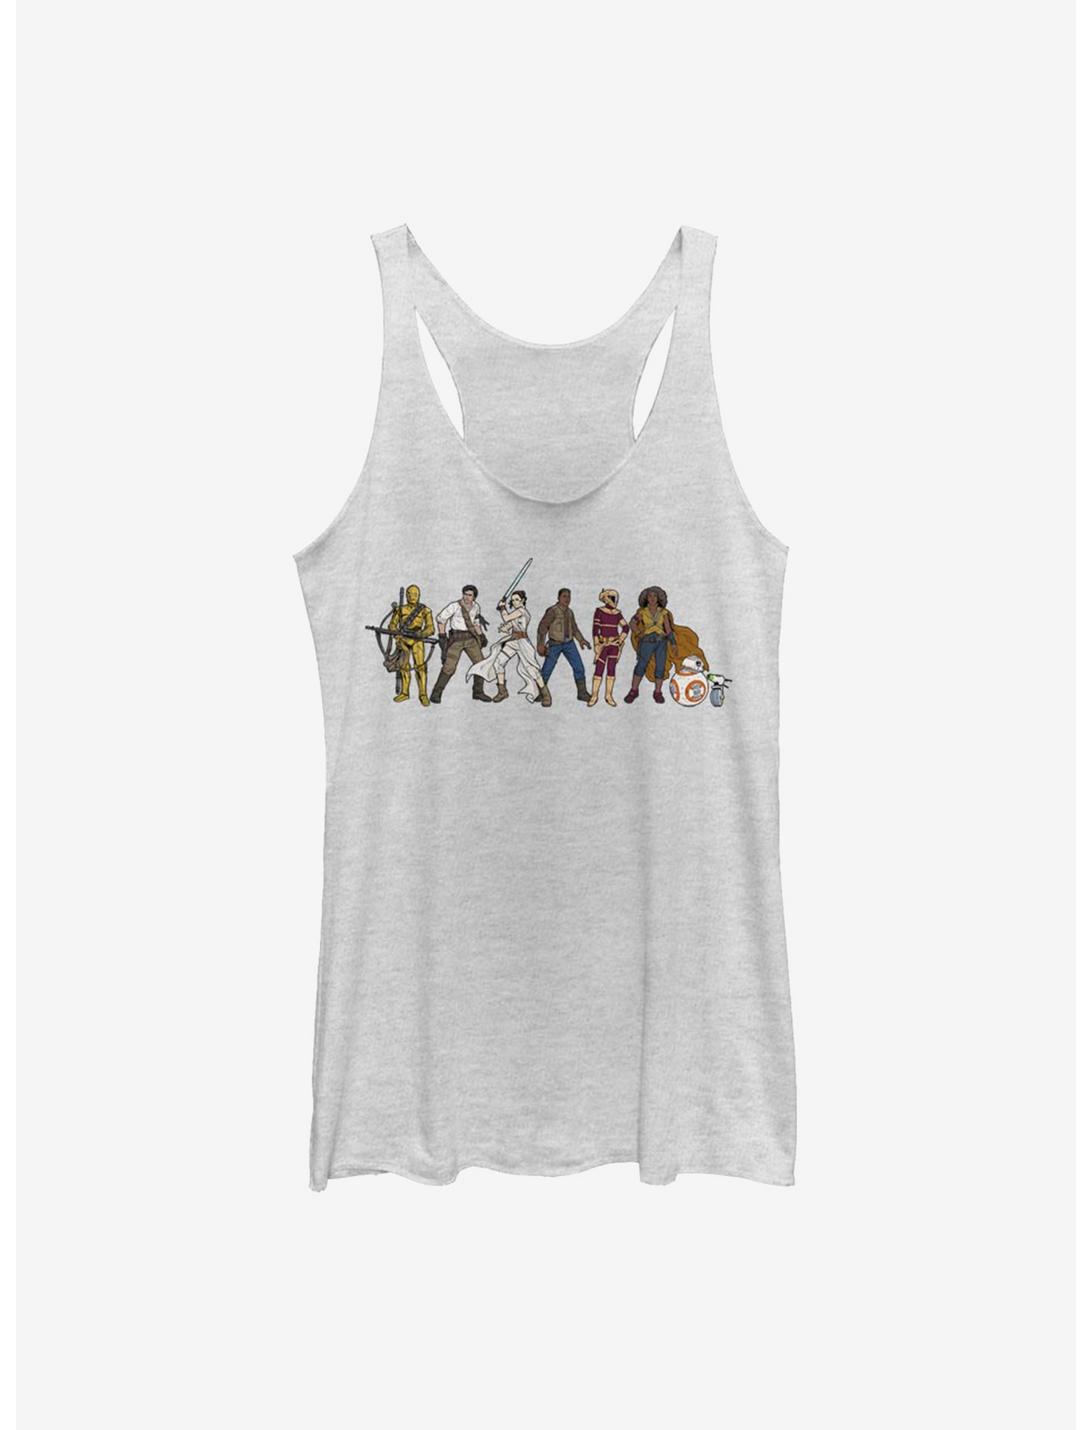 Star Wars Episode IX The Rise Of Skywalker Resistance Lineup Womens Tank Top, WHITE HTR, hi-res